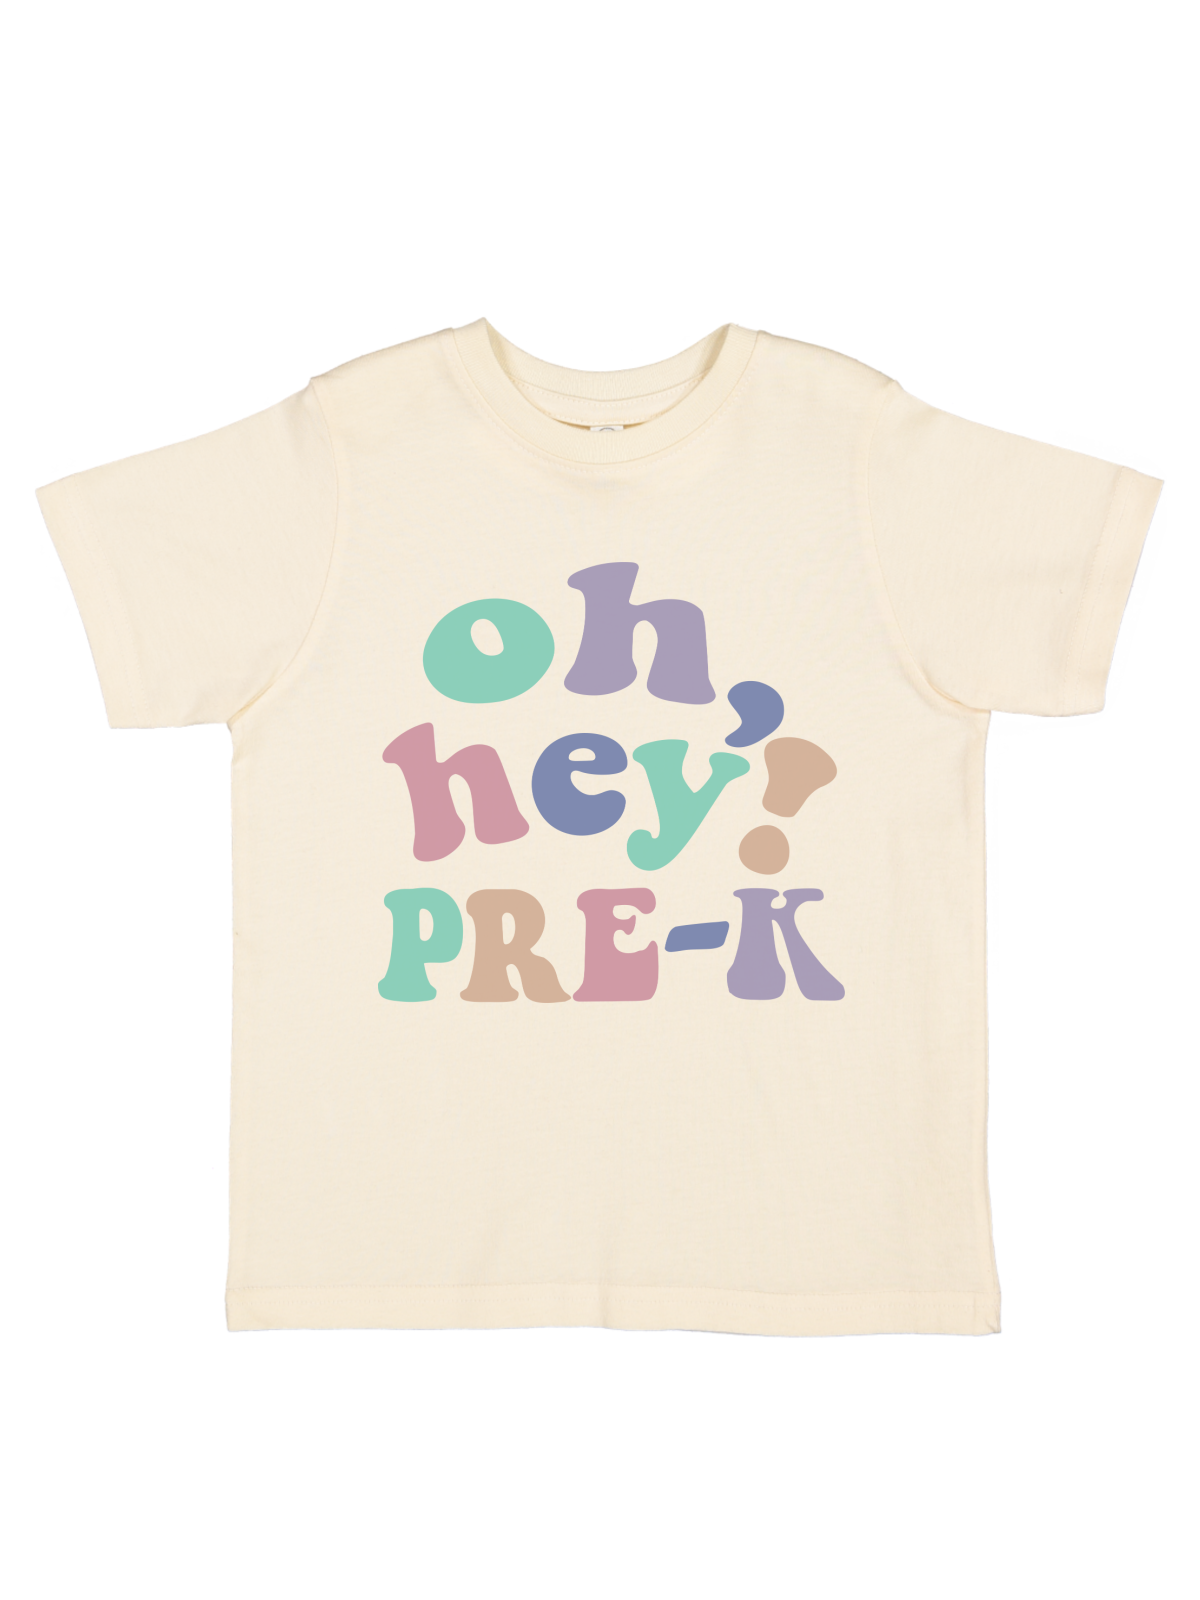 Oh Hey Pre K Toddler First Day of School Shirt